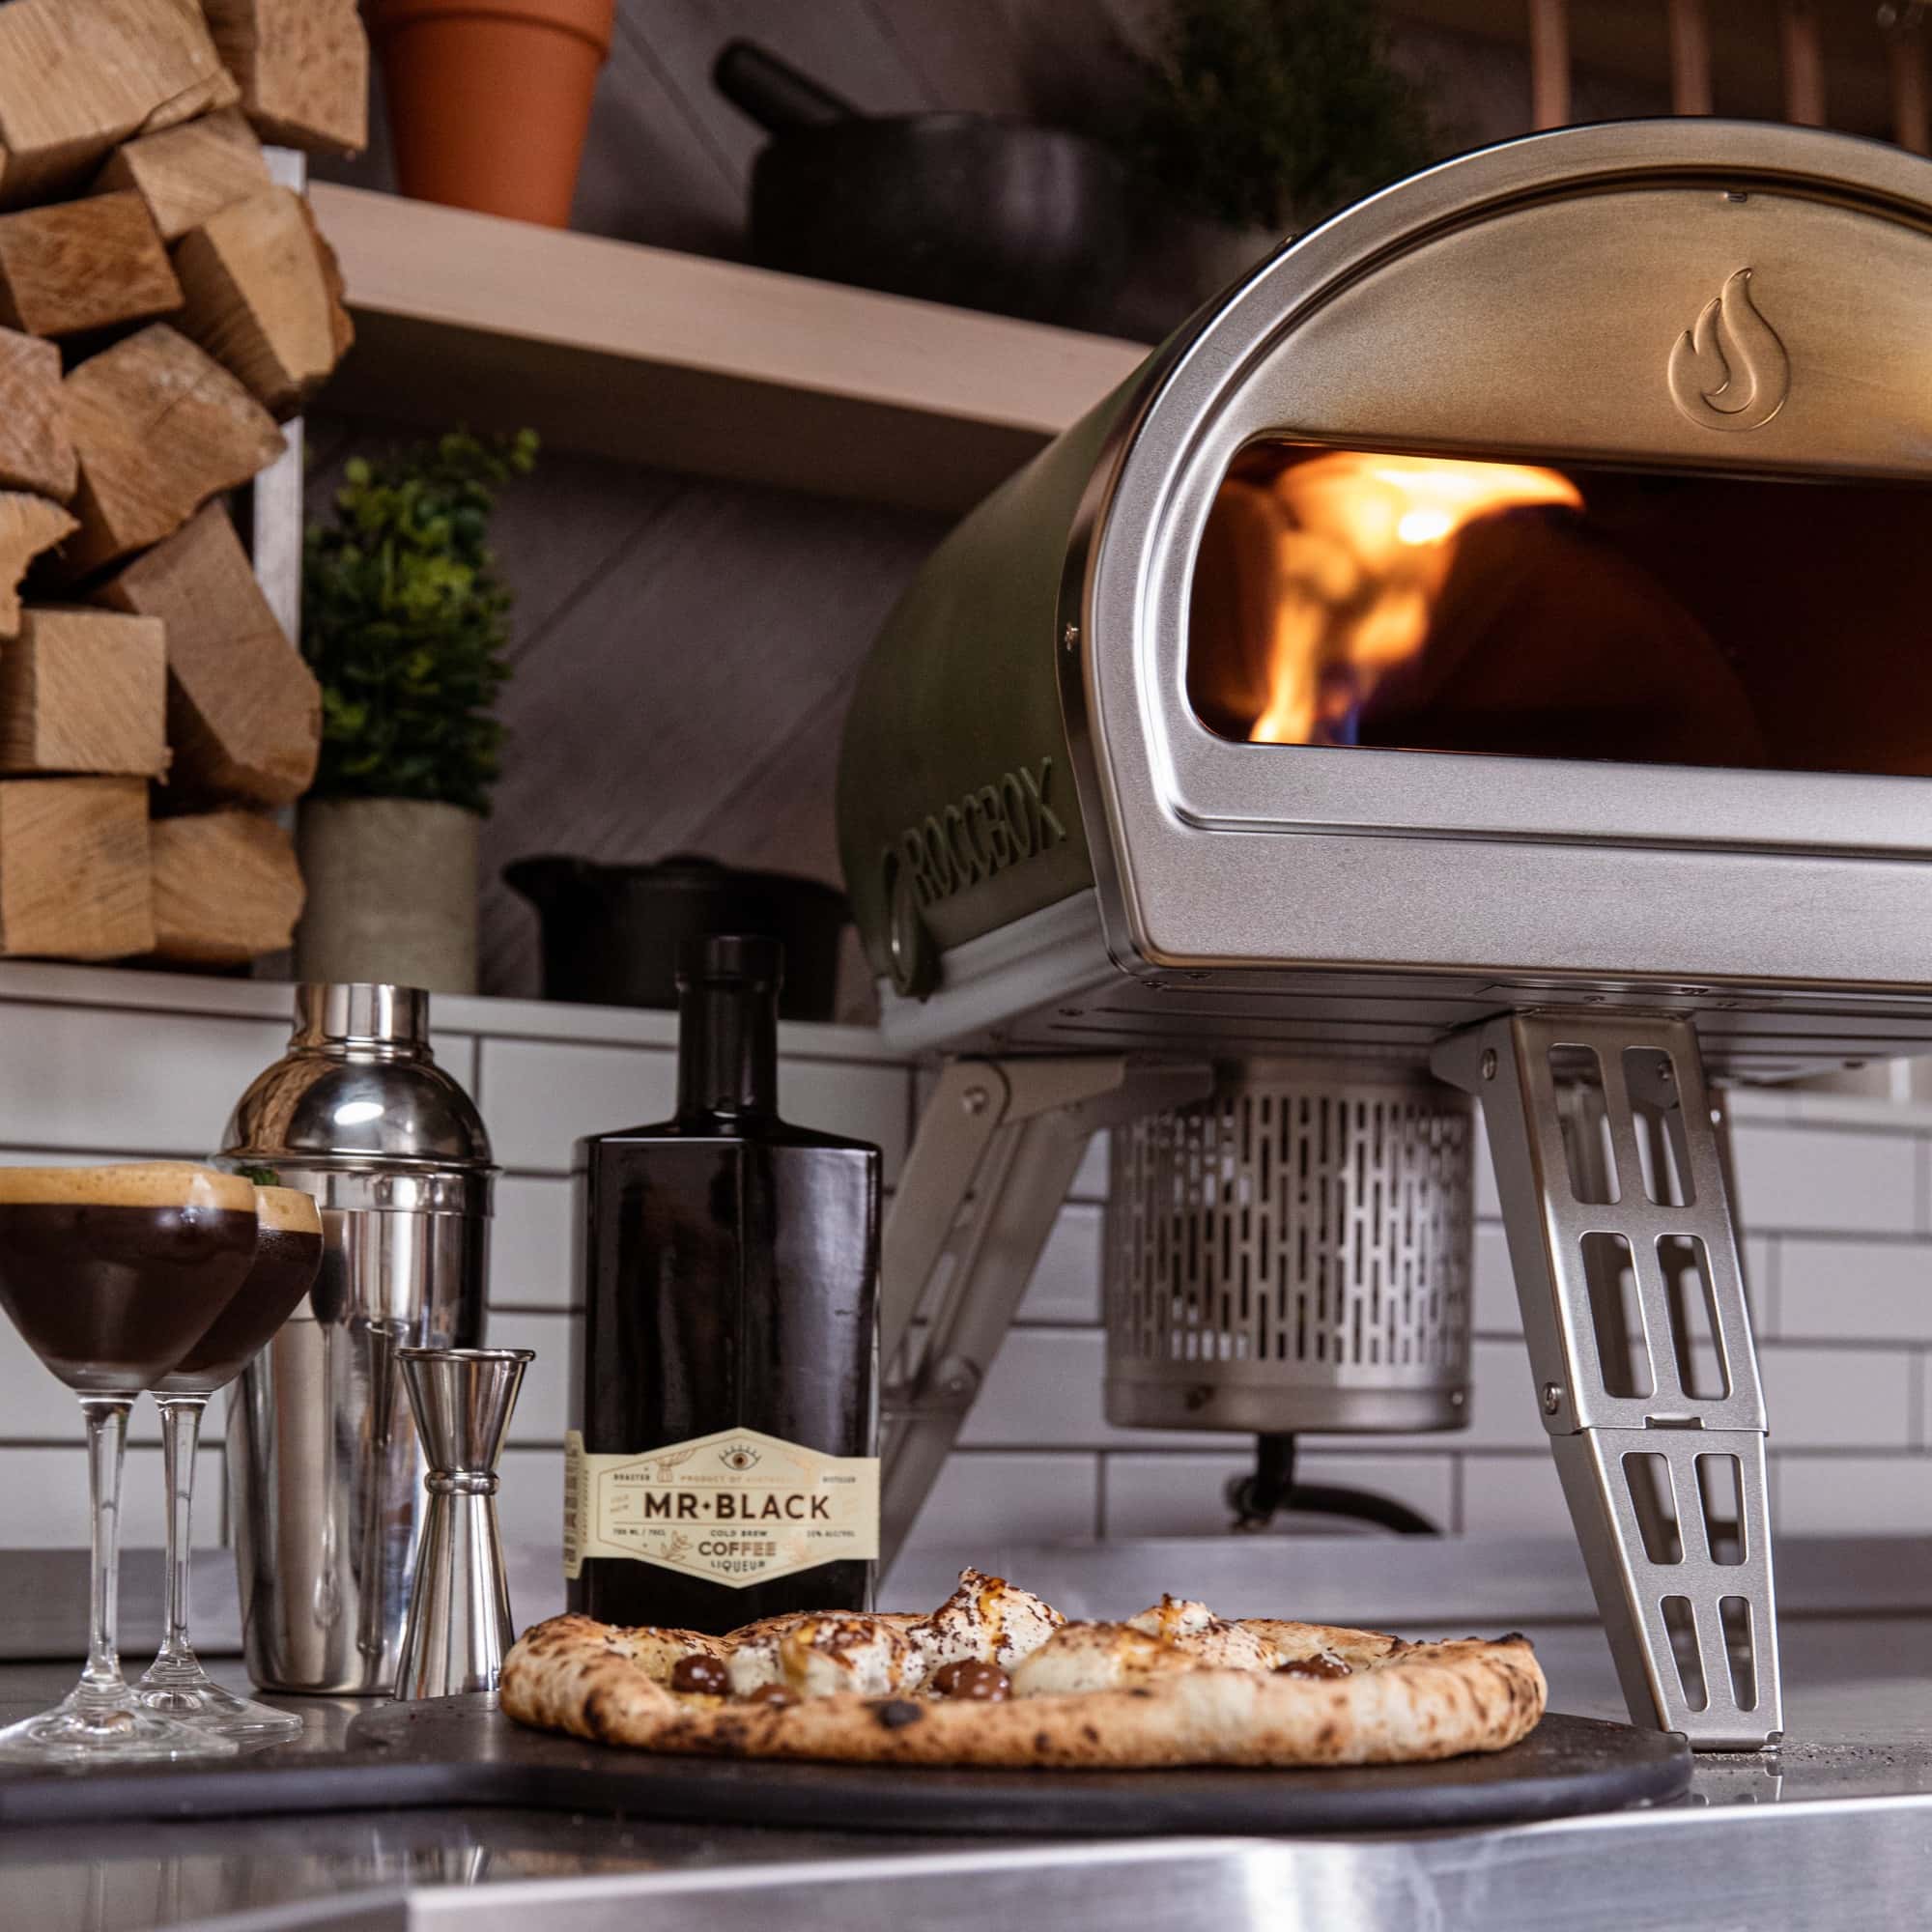 Gozney Pizza Oven Review Must Read This Before Buying 3906